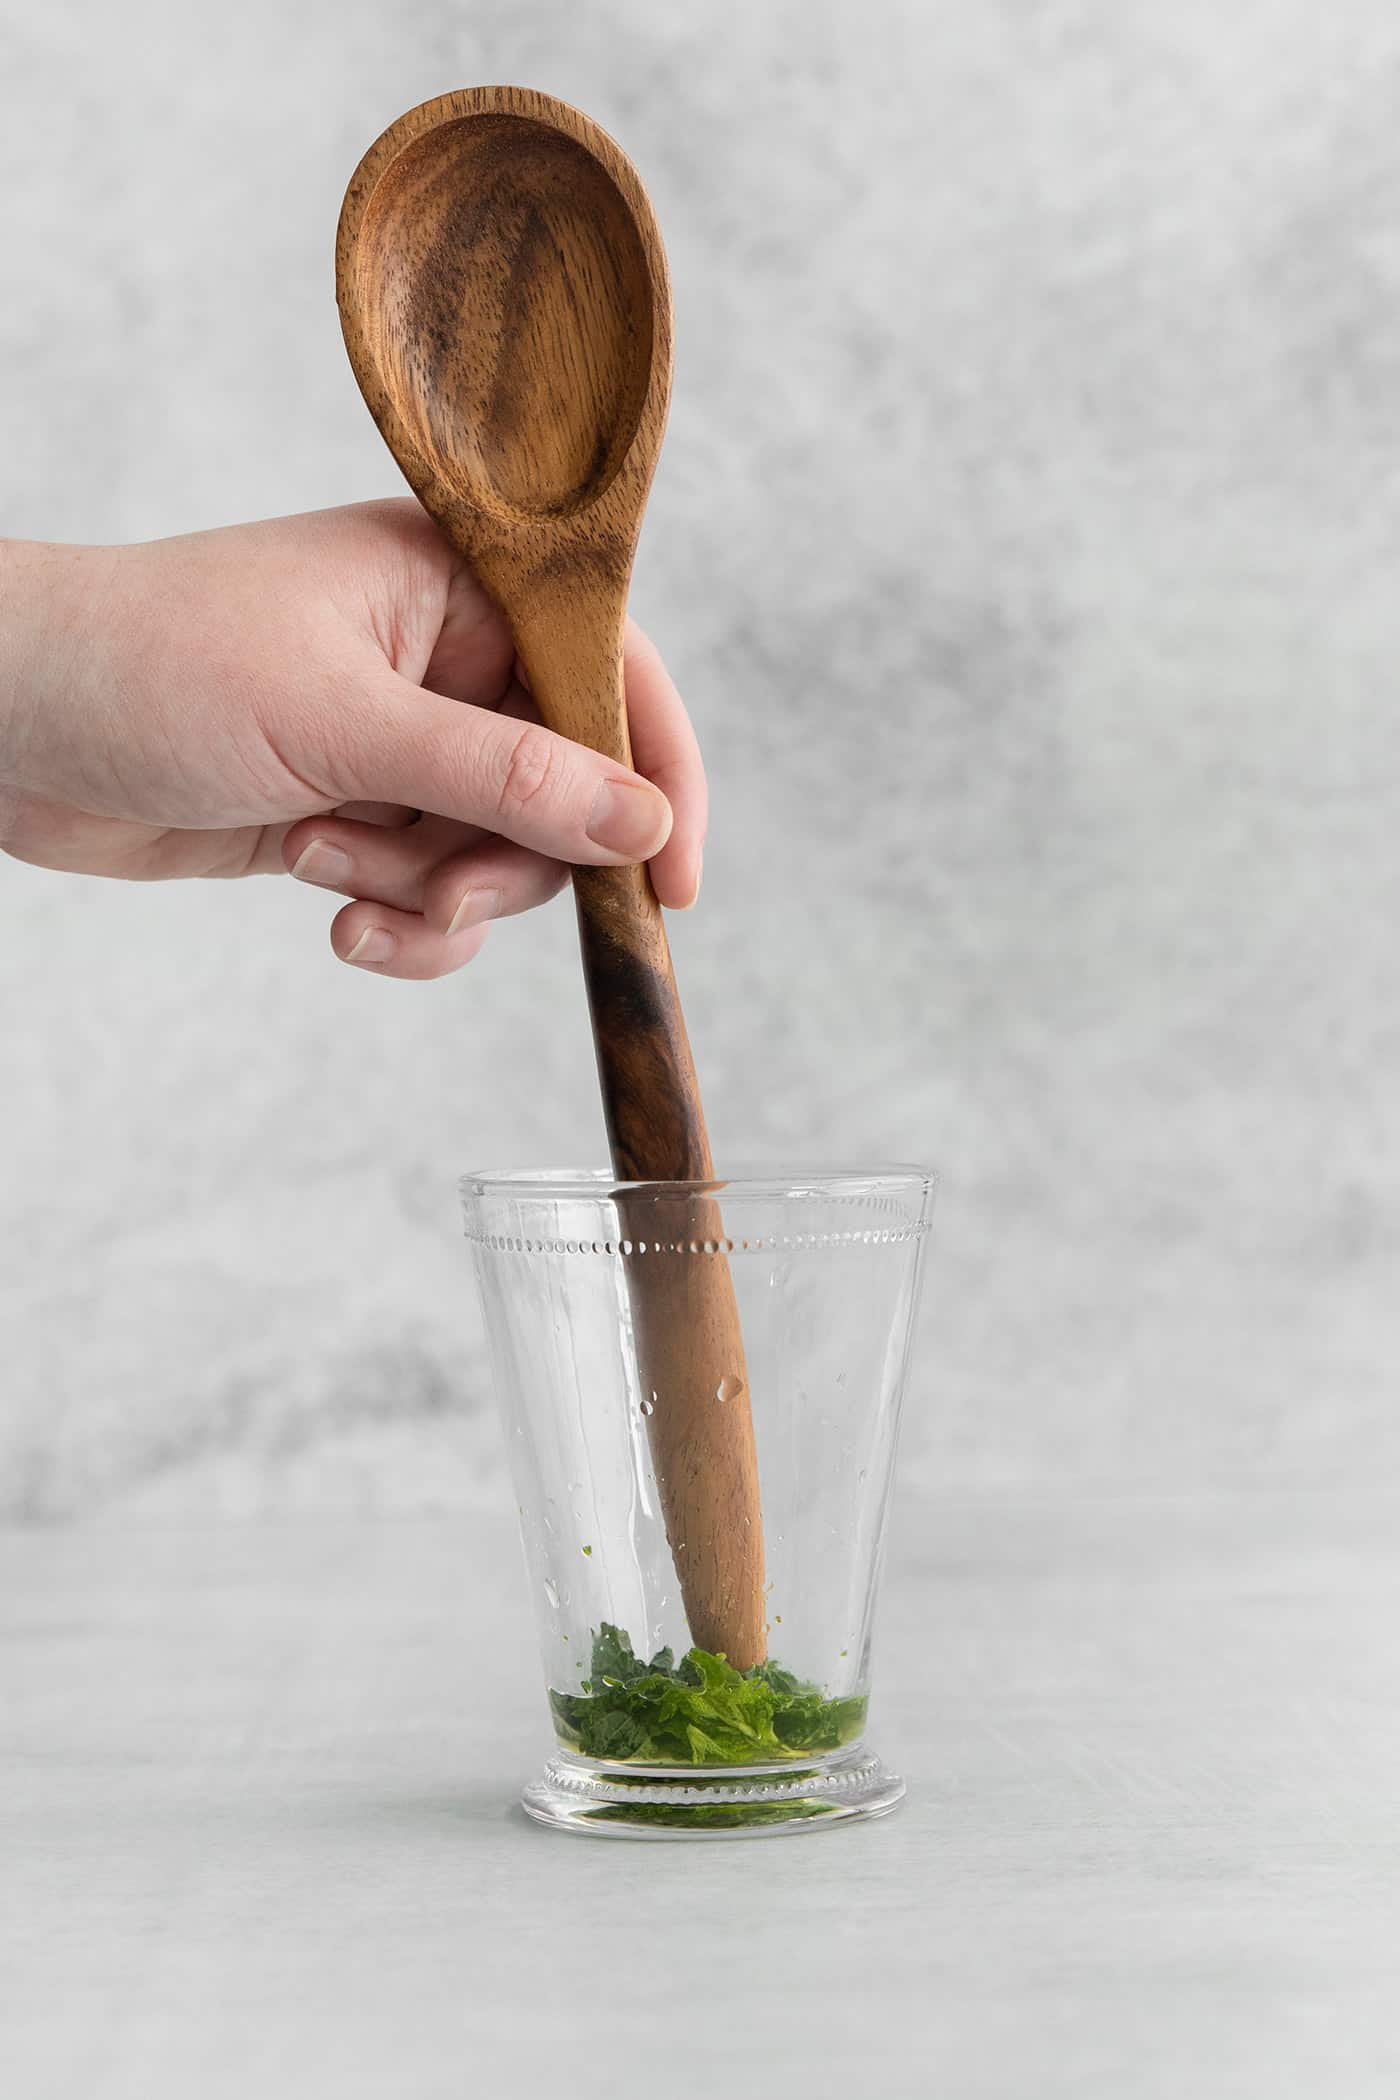 The end of a wooden spoon muddling mint in a glass